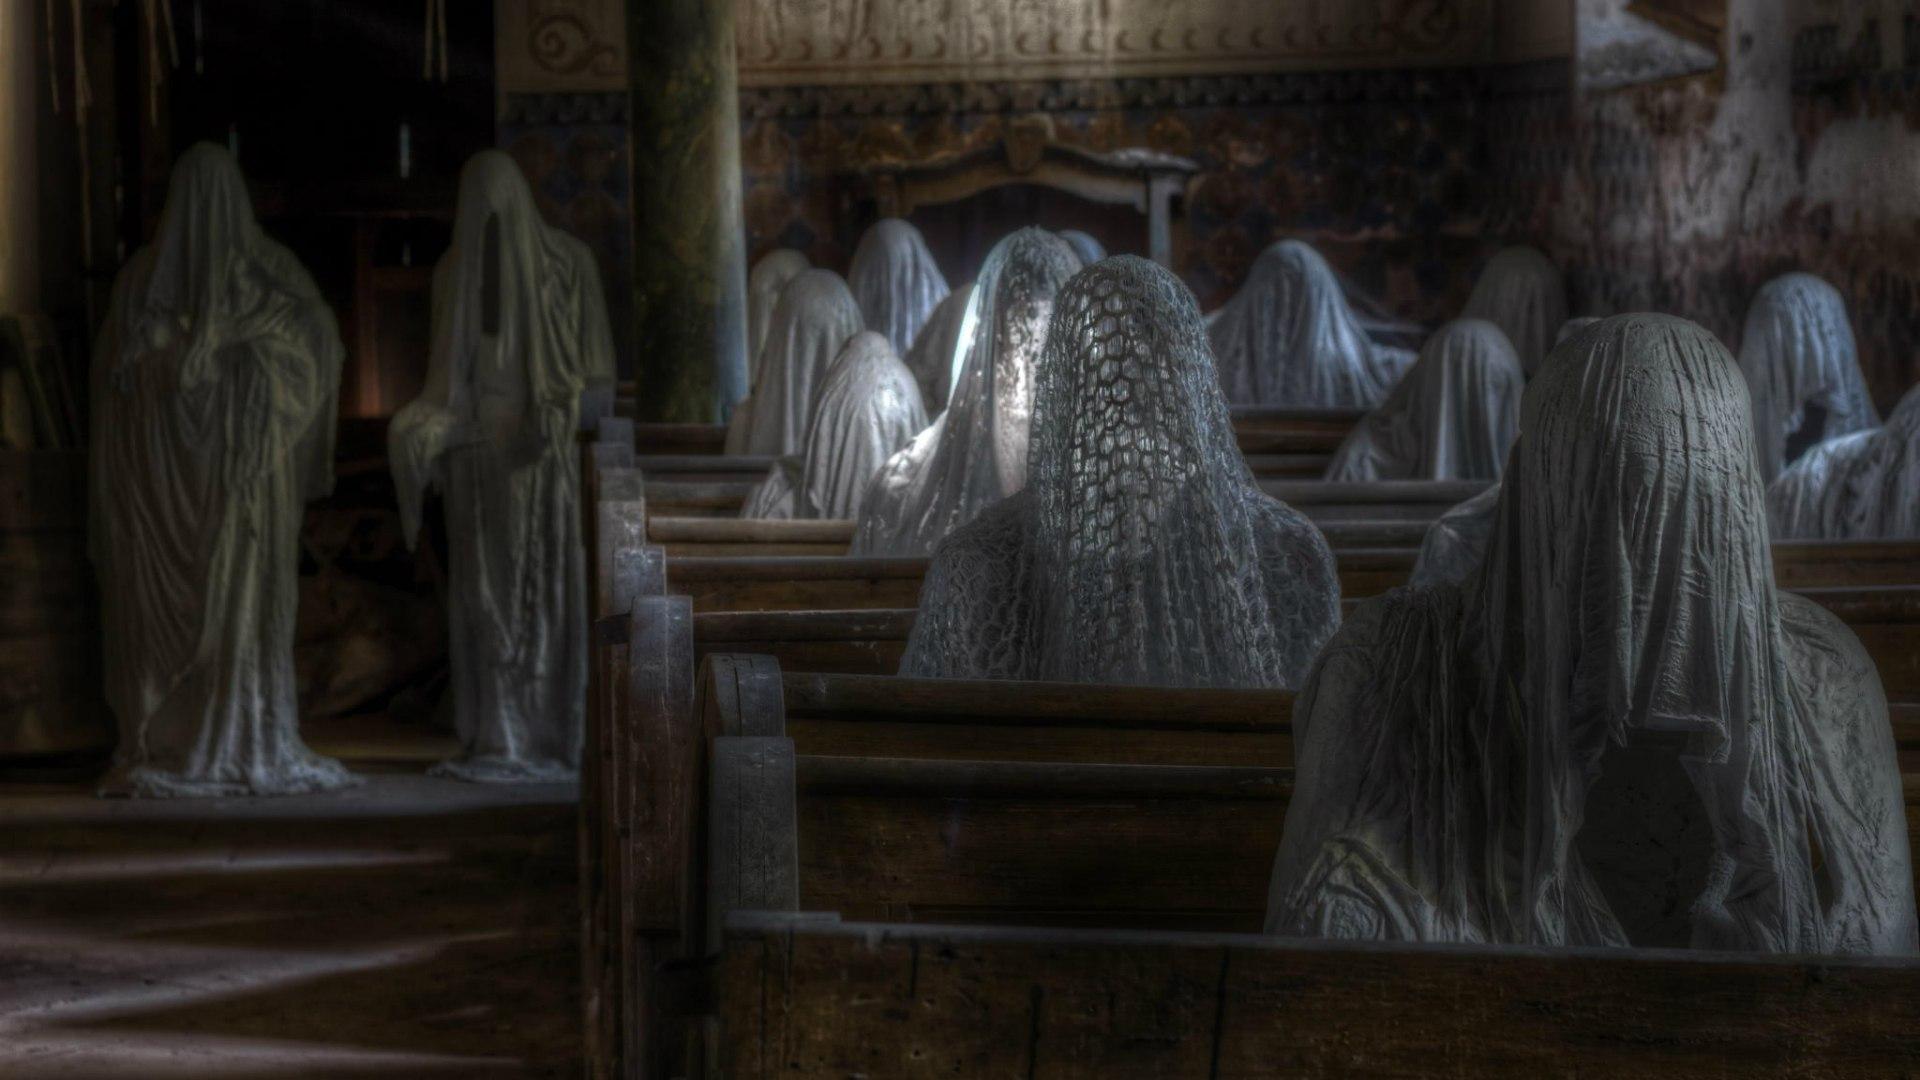 Ghosts in the church wallpaper and image, picture